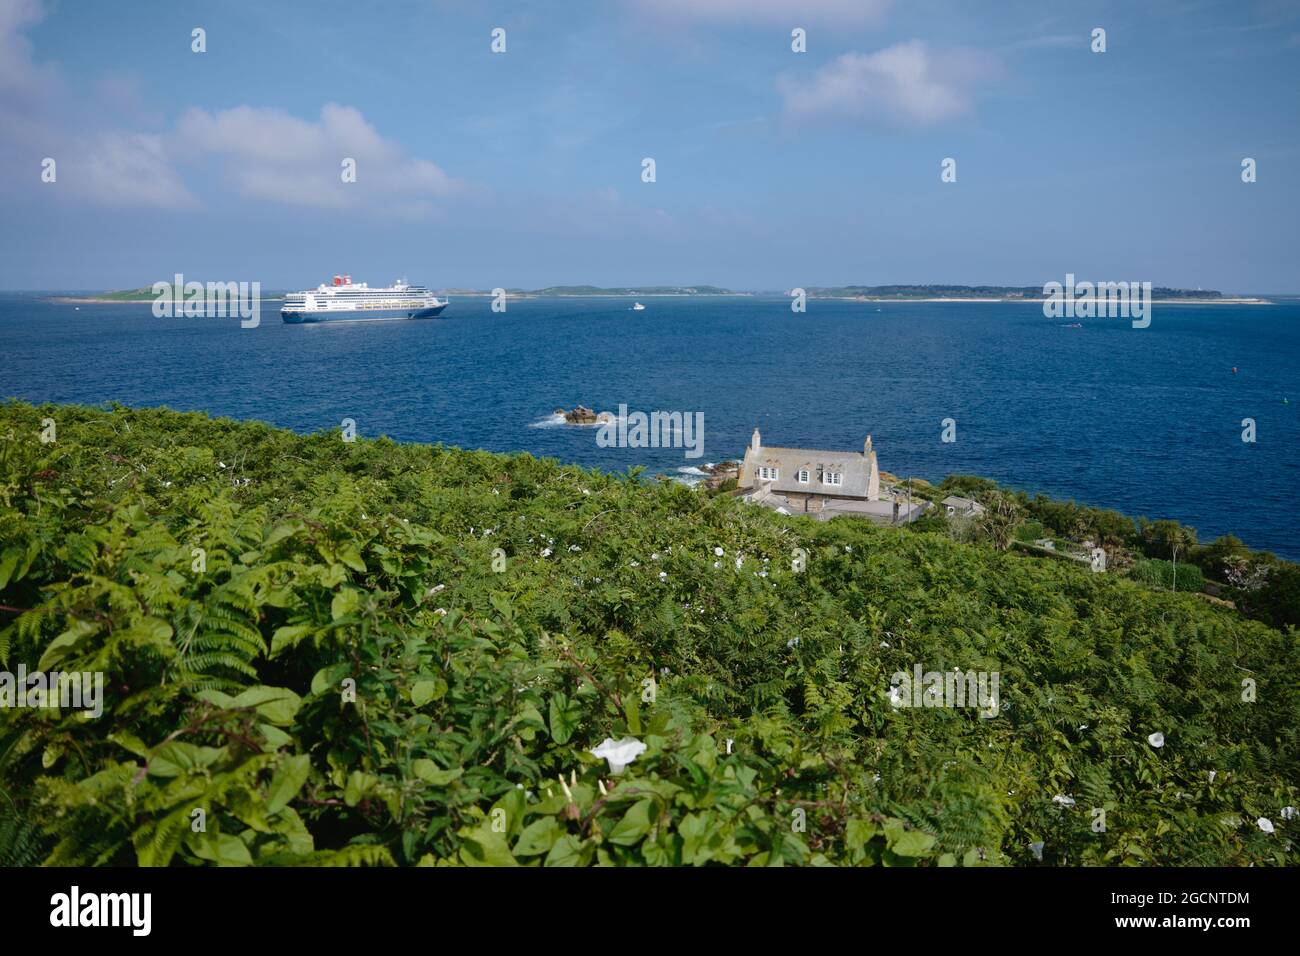 A cruise ship off the coast of St Mary's island, viewed from Garrison Hill, Isles of Scilly, Cornwall, England, UK, July 2021 Stock Photo